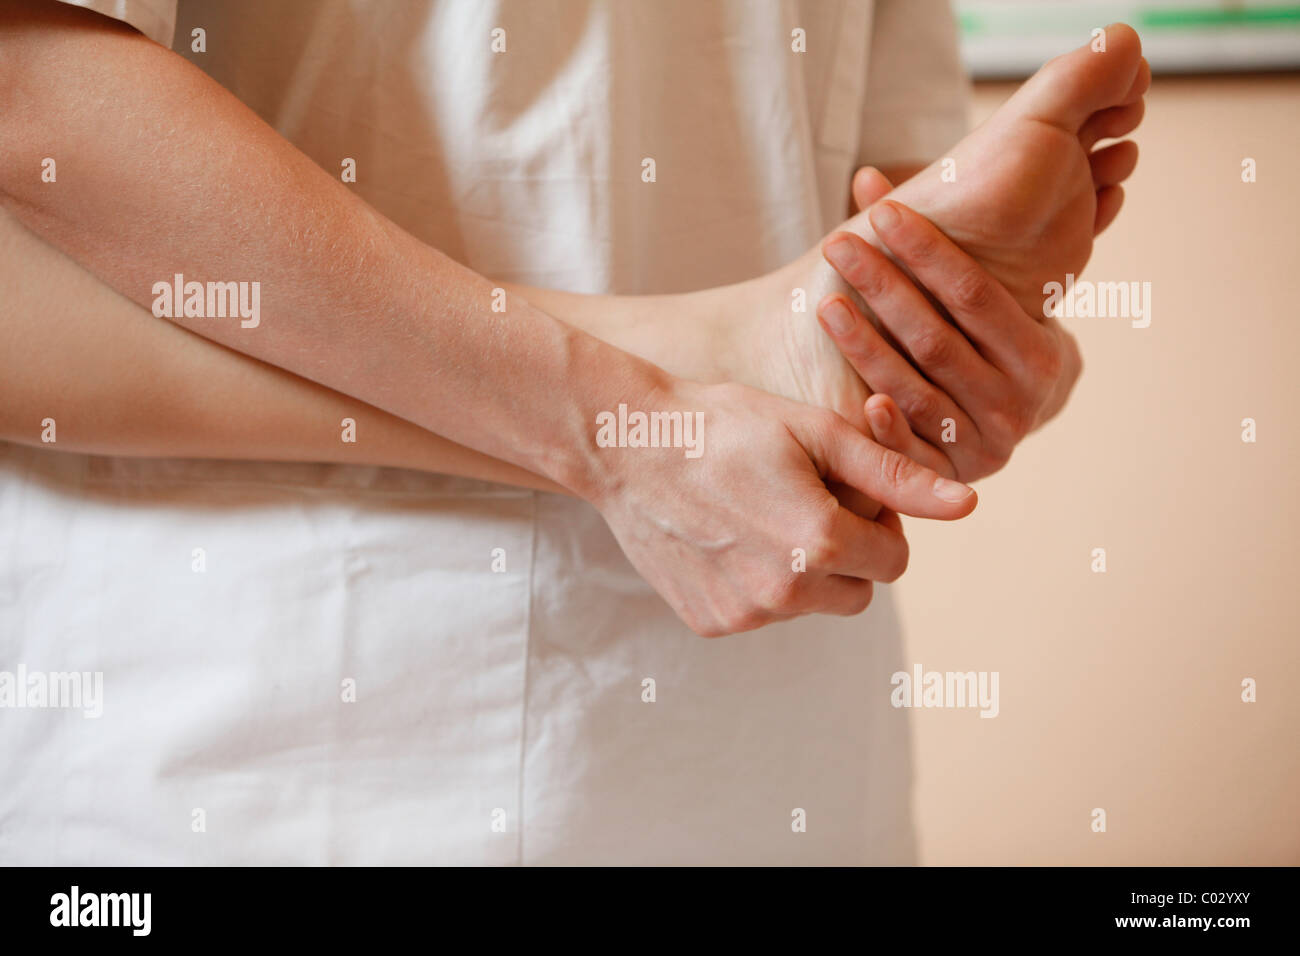 physiotherapy Stock Photo